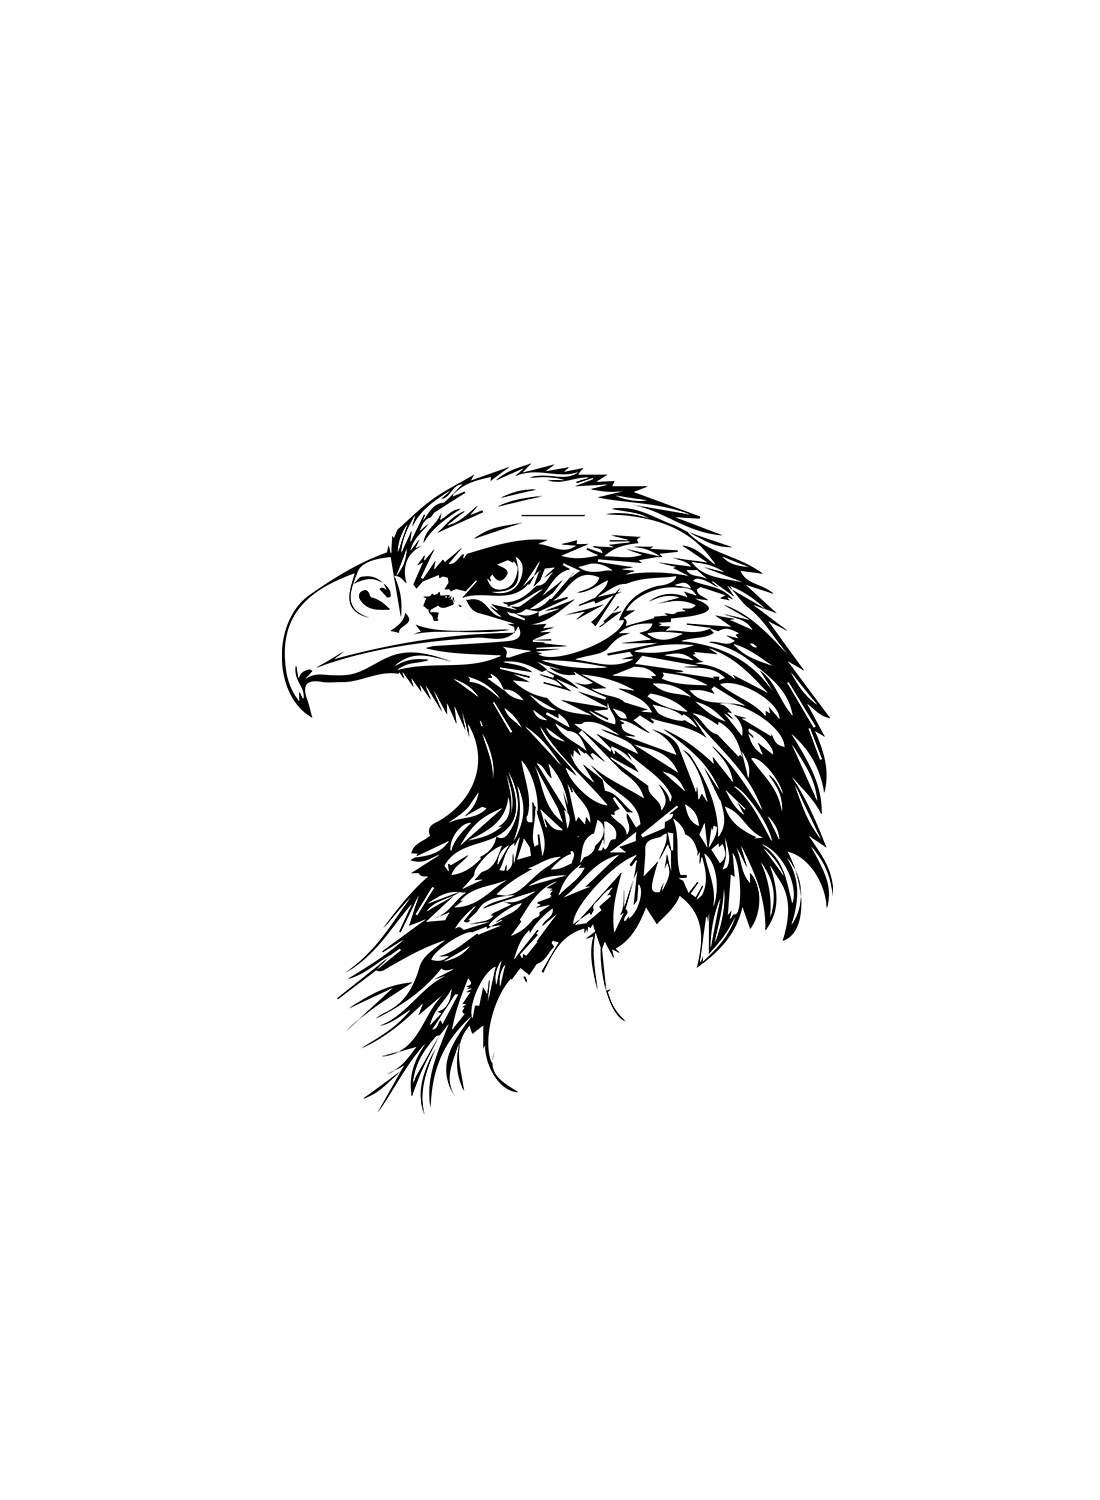 Black and white drawing of an eagle.